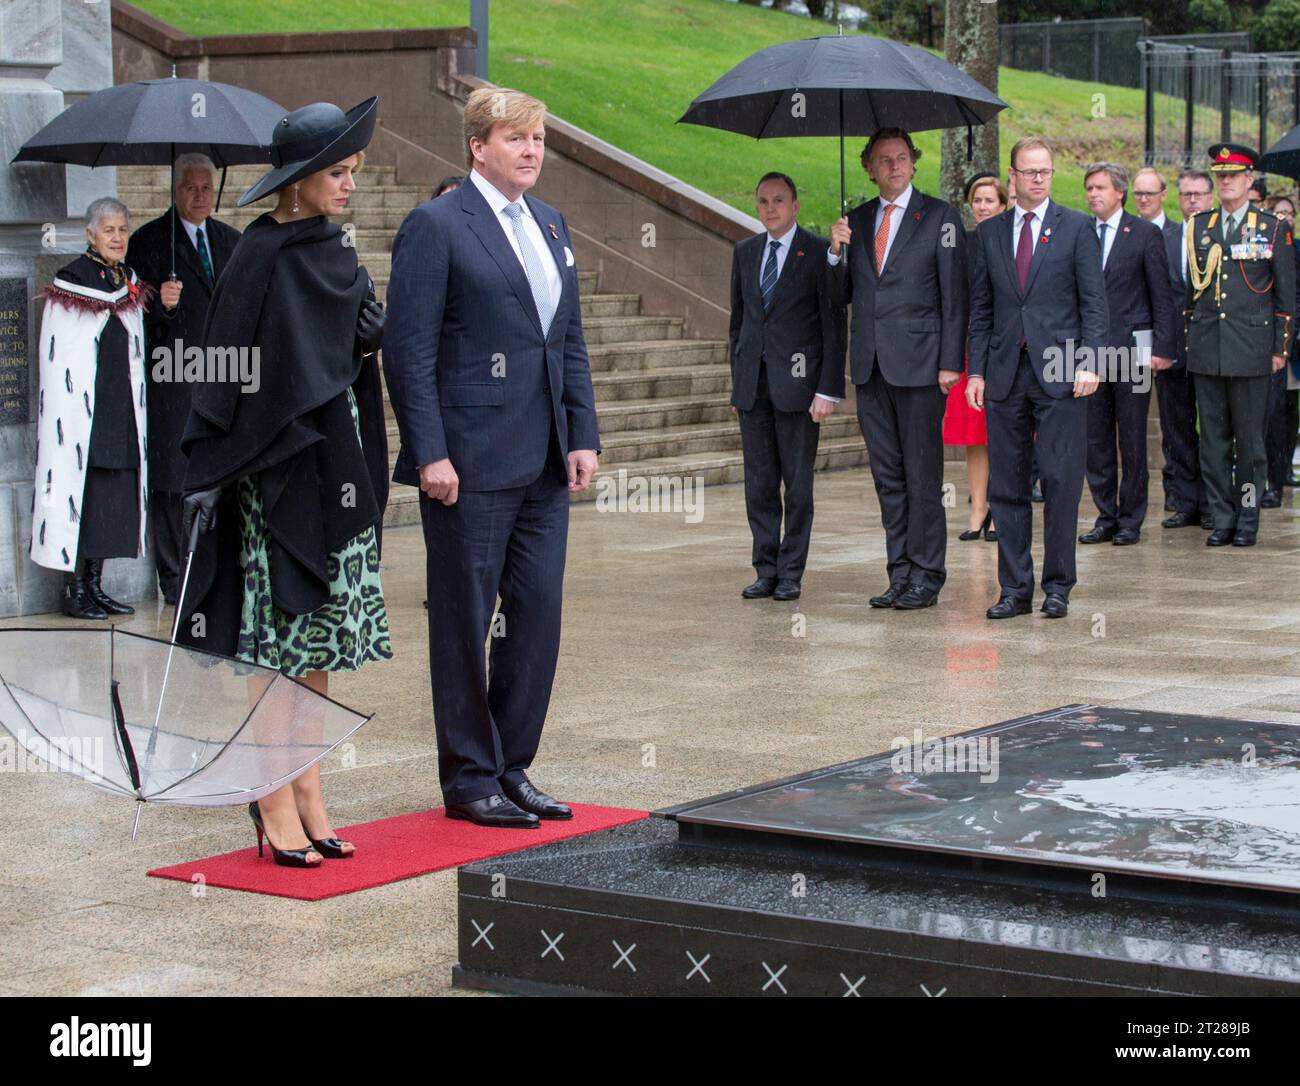 King Willem-Alexander and Queen Maxima of the Netherlands at the Tomb of the Unknown Warrior at the National War Memorial, Wellington, New Zealand Stock Photo